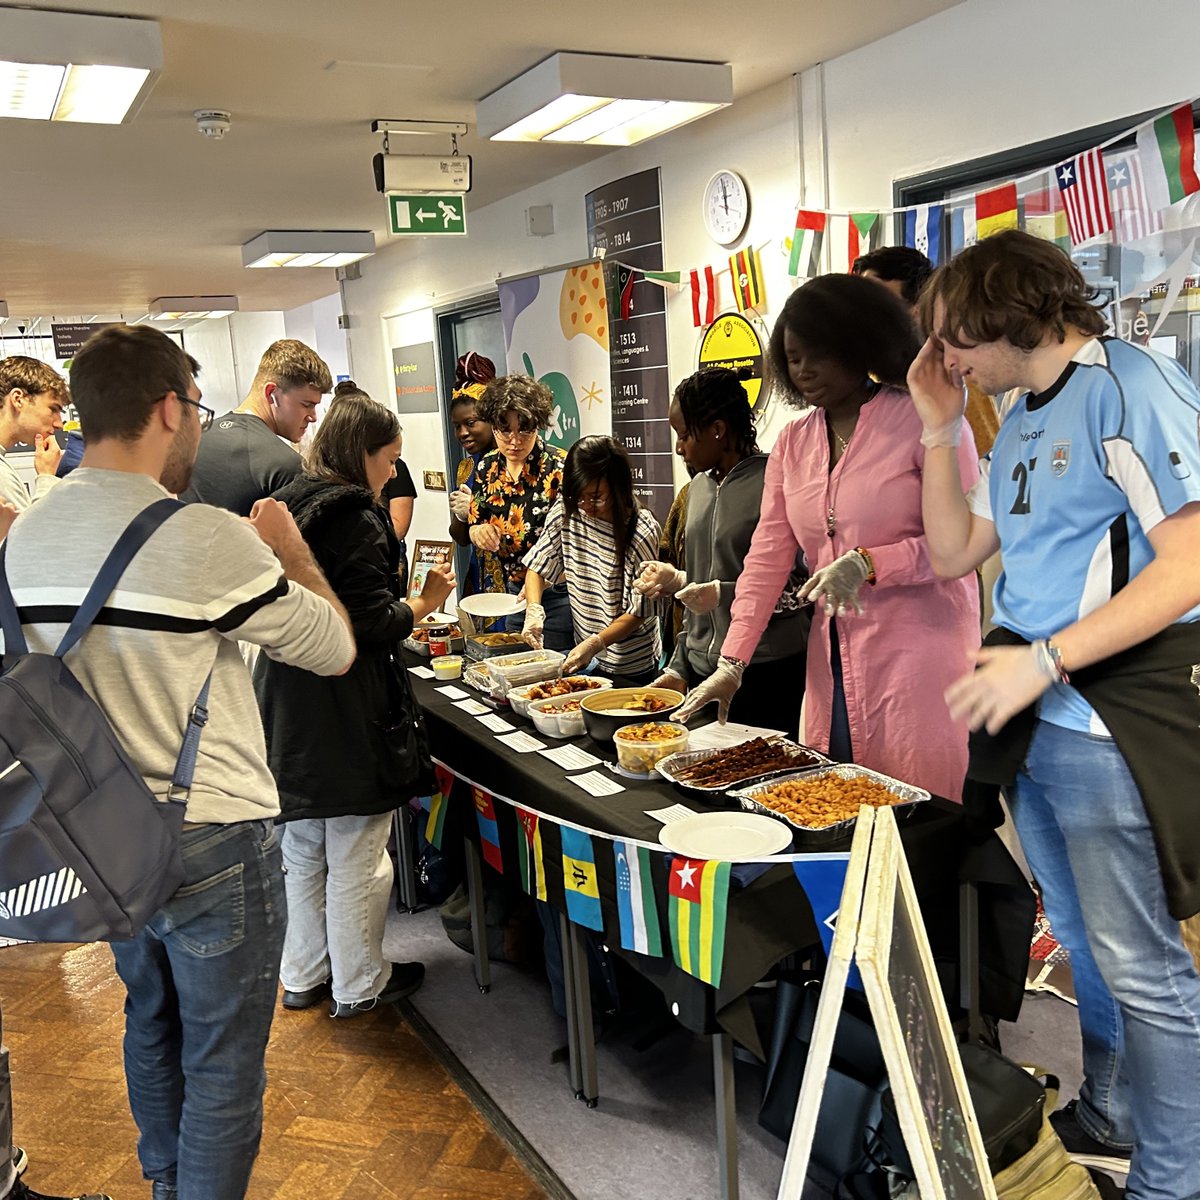 Our Cultural Food Showcase was a hit! The student-led Beyond Borders EXtra club organised this celebration of foods from around the world. We're proud to shine a light on our diverse student body. 

#ExeCollProud